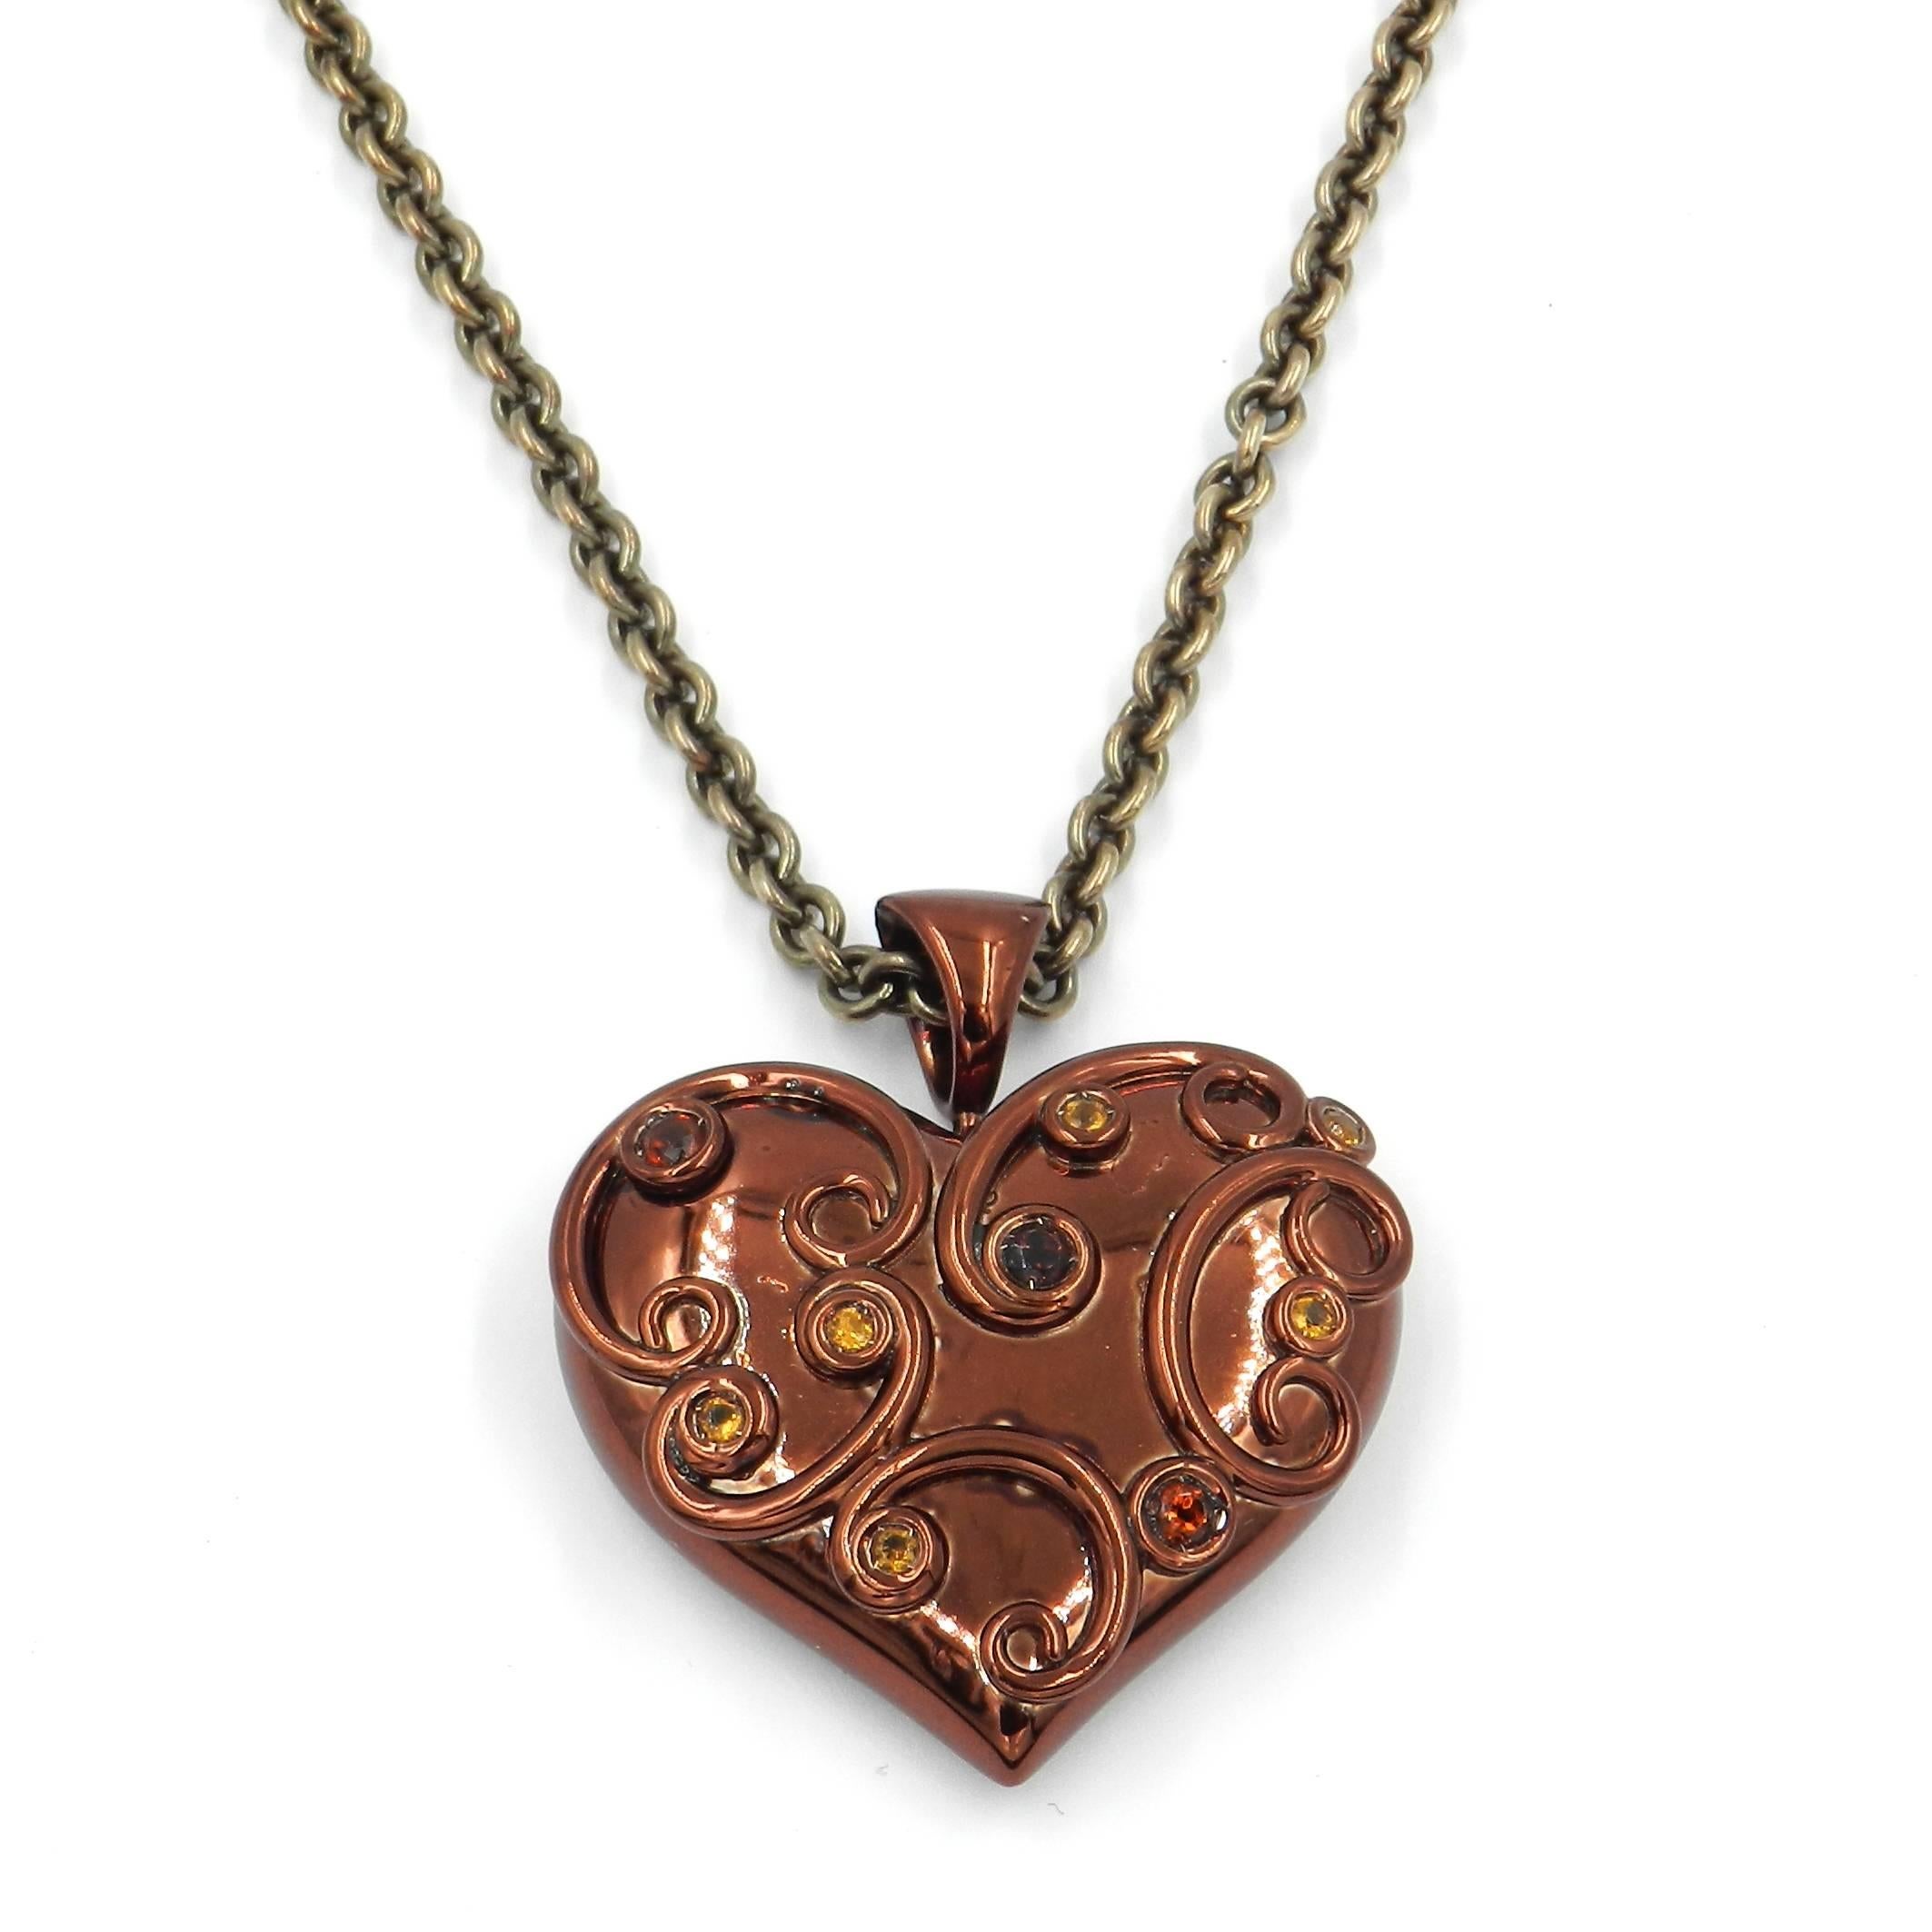 Originally designed across the millenium this fabulous chain with a brown enamelled heart pendant is in silver and features a total of carat 0.80 of citrine, madera citrine and smoky quartz. The pendant size is mm 40 x 35 . The chain lenght is 50